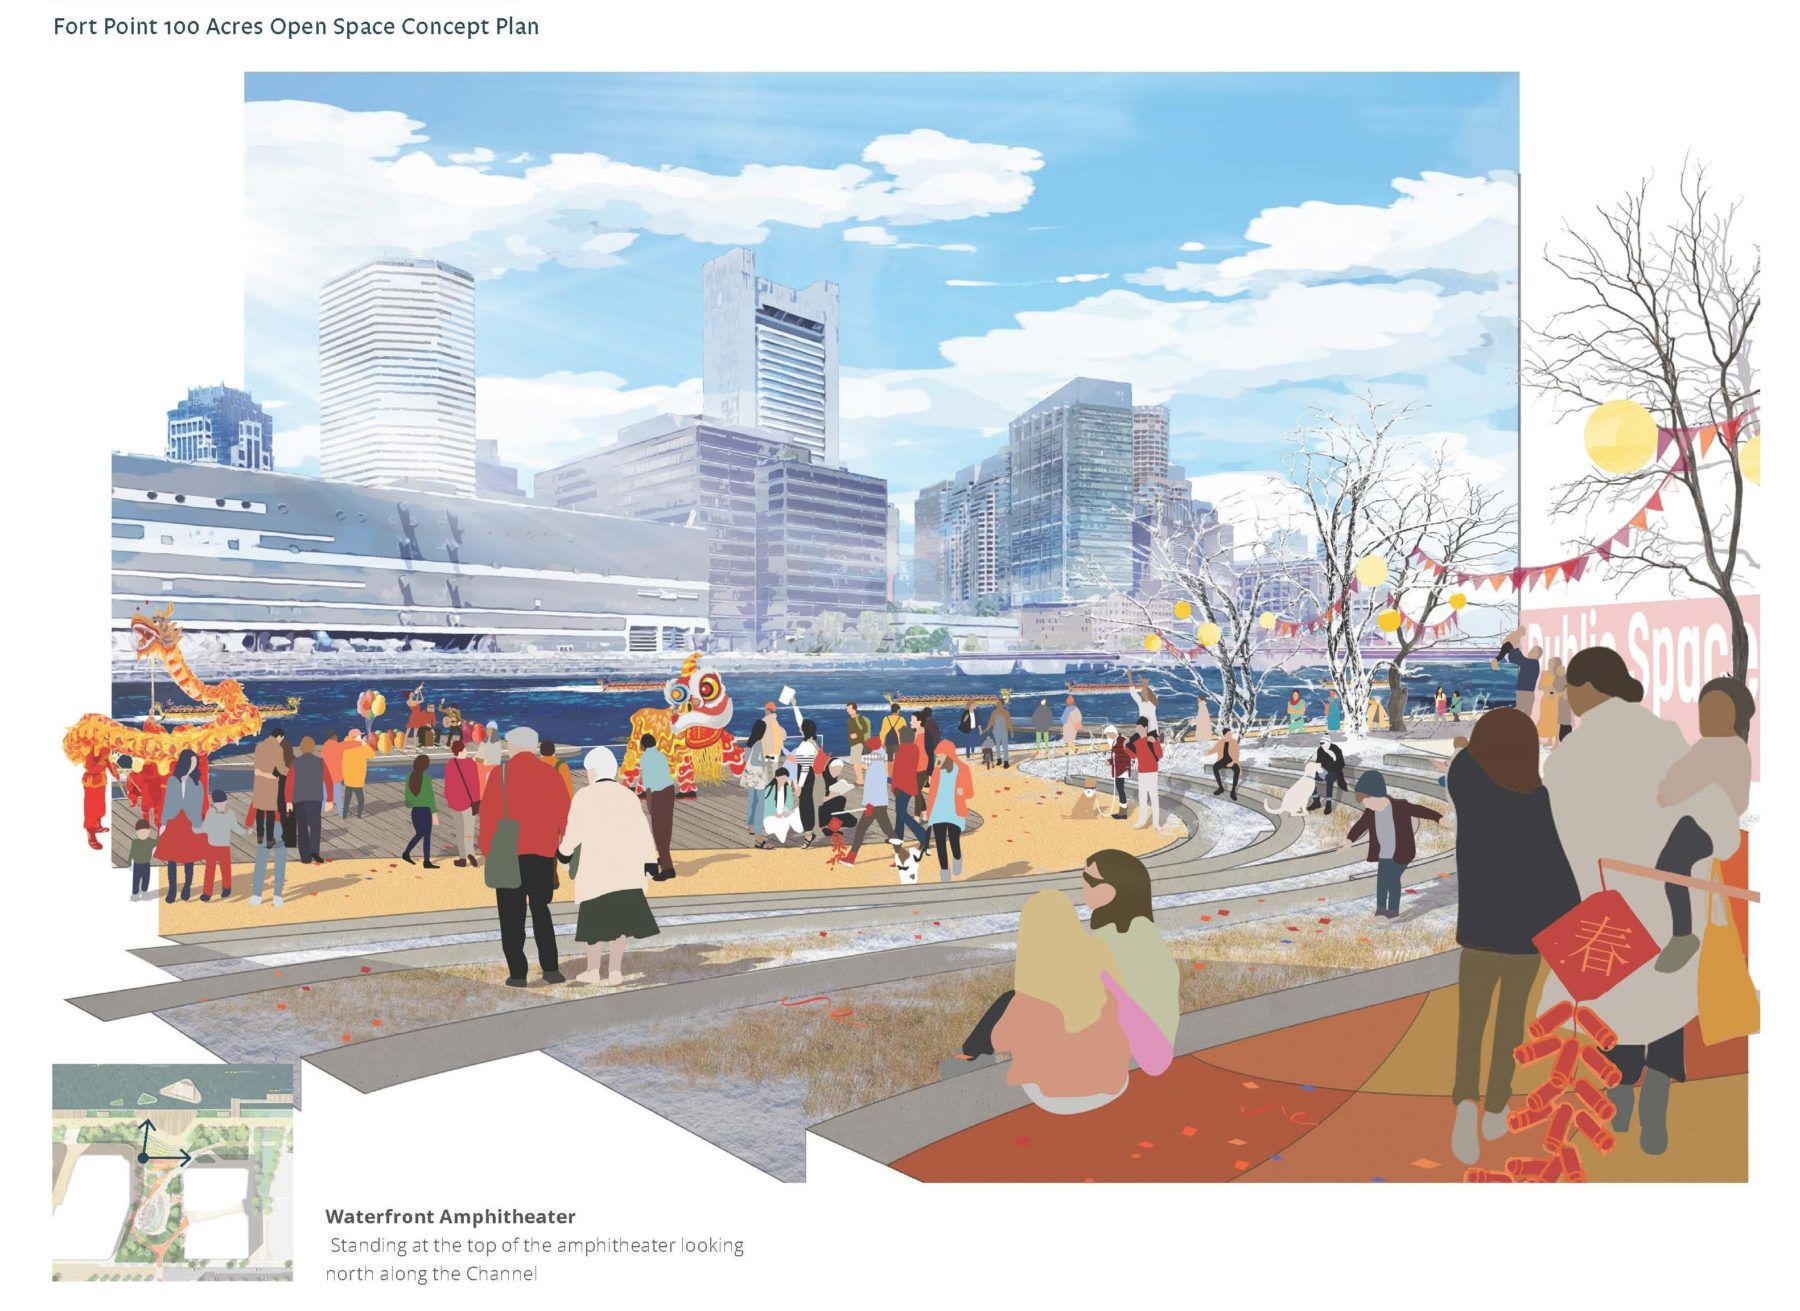 The Open Space Concept Plan envisions a network of public spaces for the Fort Point 100 Acres neighborhood that is welcoming and engaging for a broad range of users, from residents in the surrounding neighborhood, to residents of inland Boston neighborhoods such as Roxbury, Dorchester, Chinatown, to local workers and tourists.